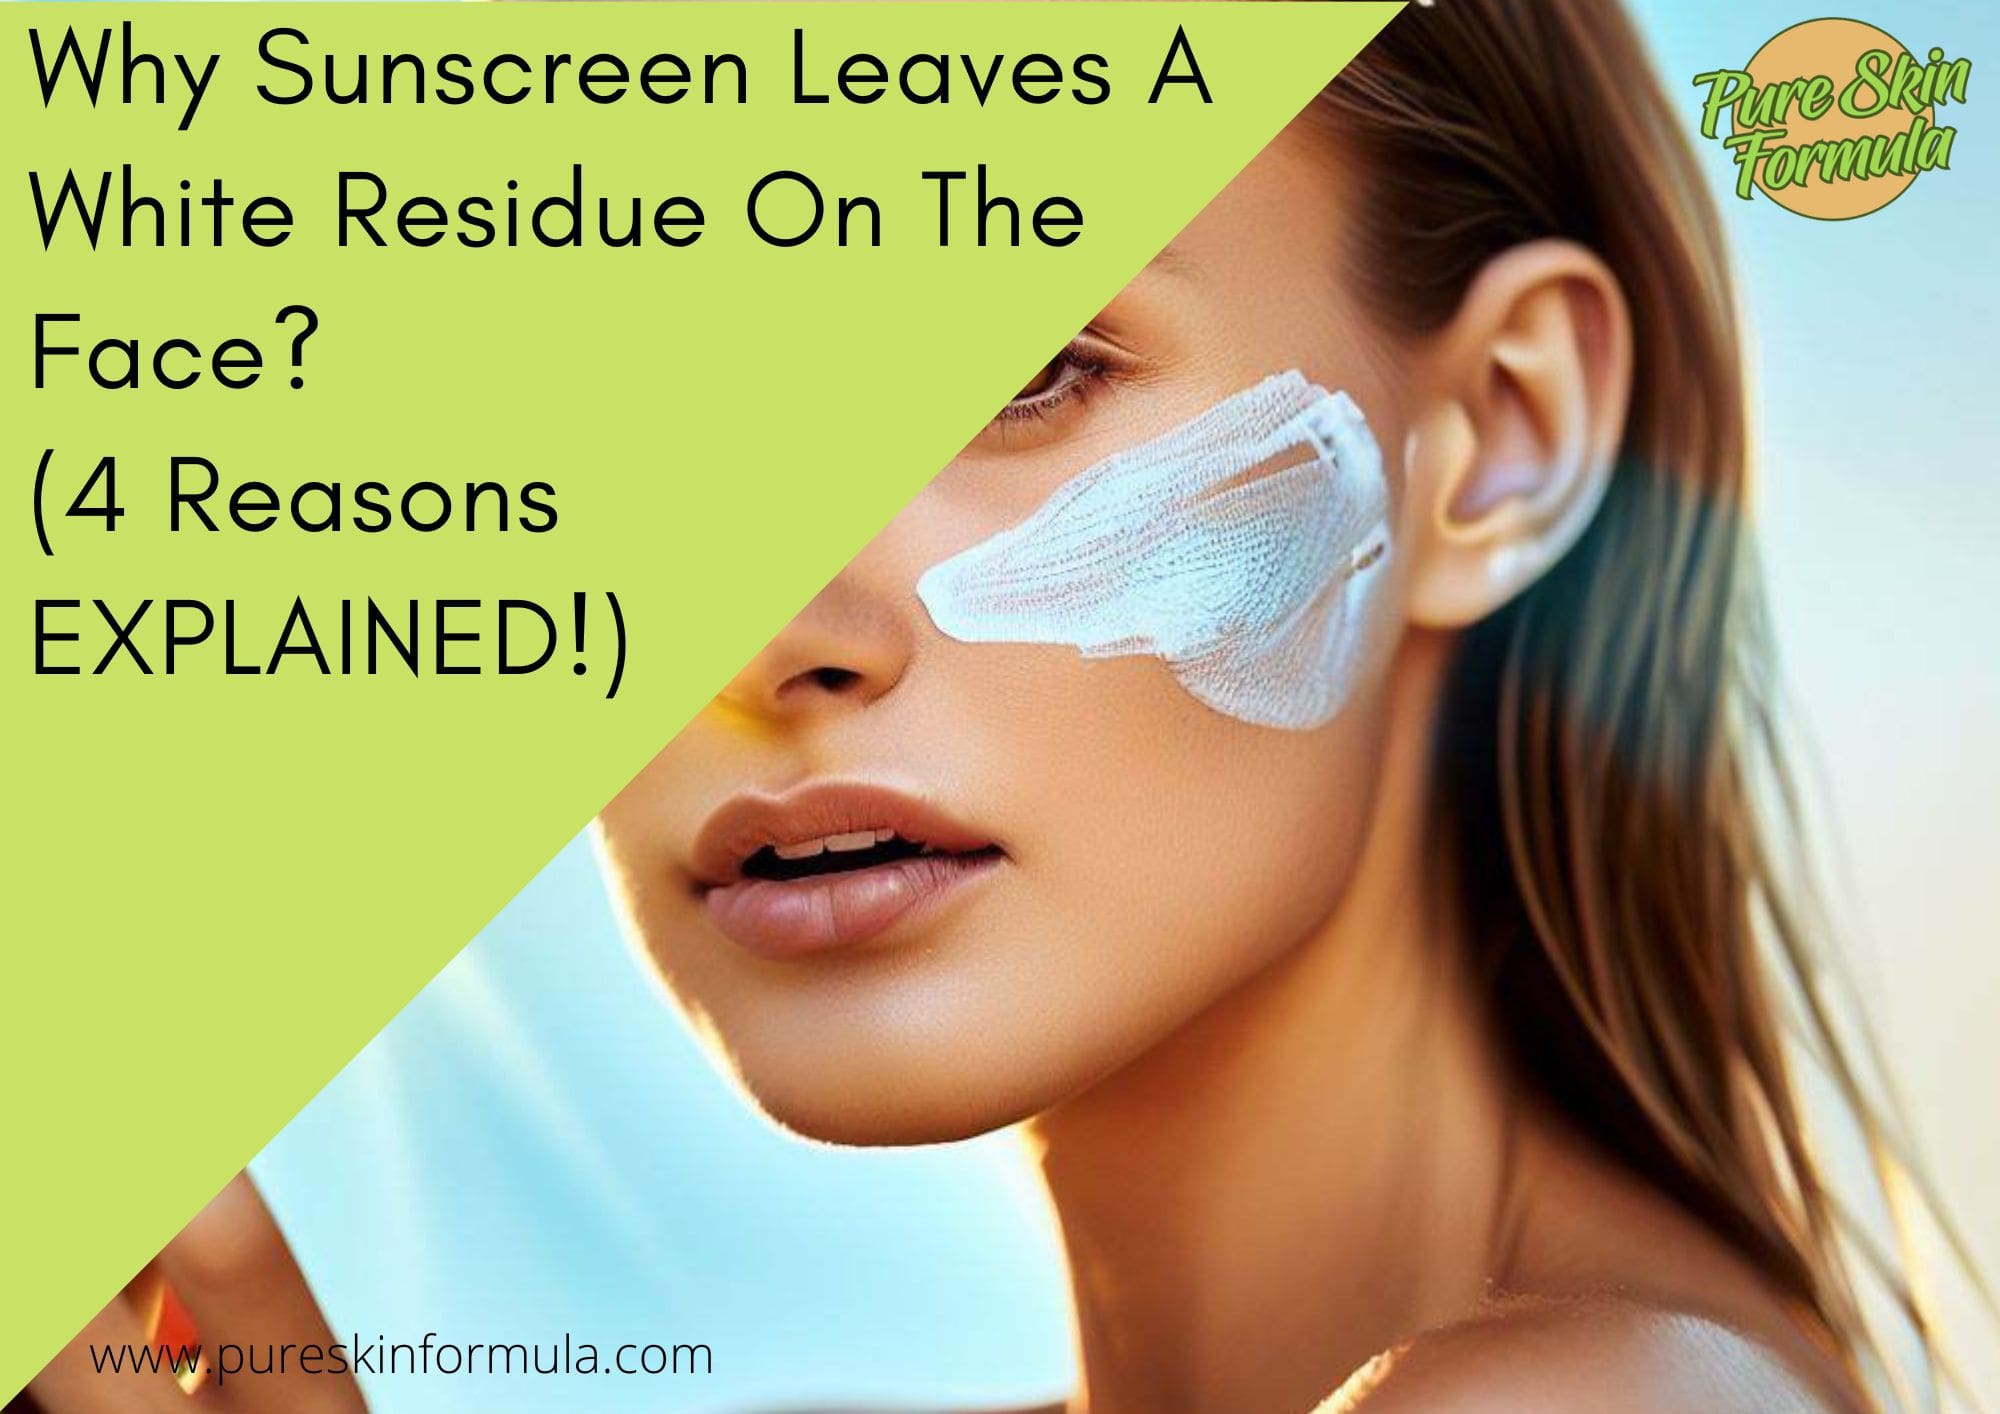 Why Sunscreen Leaves A White Residue On The Face_featured image